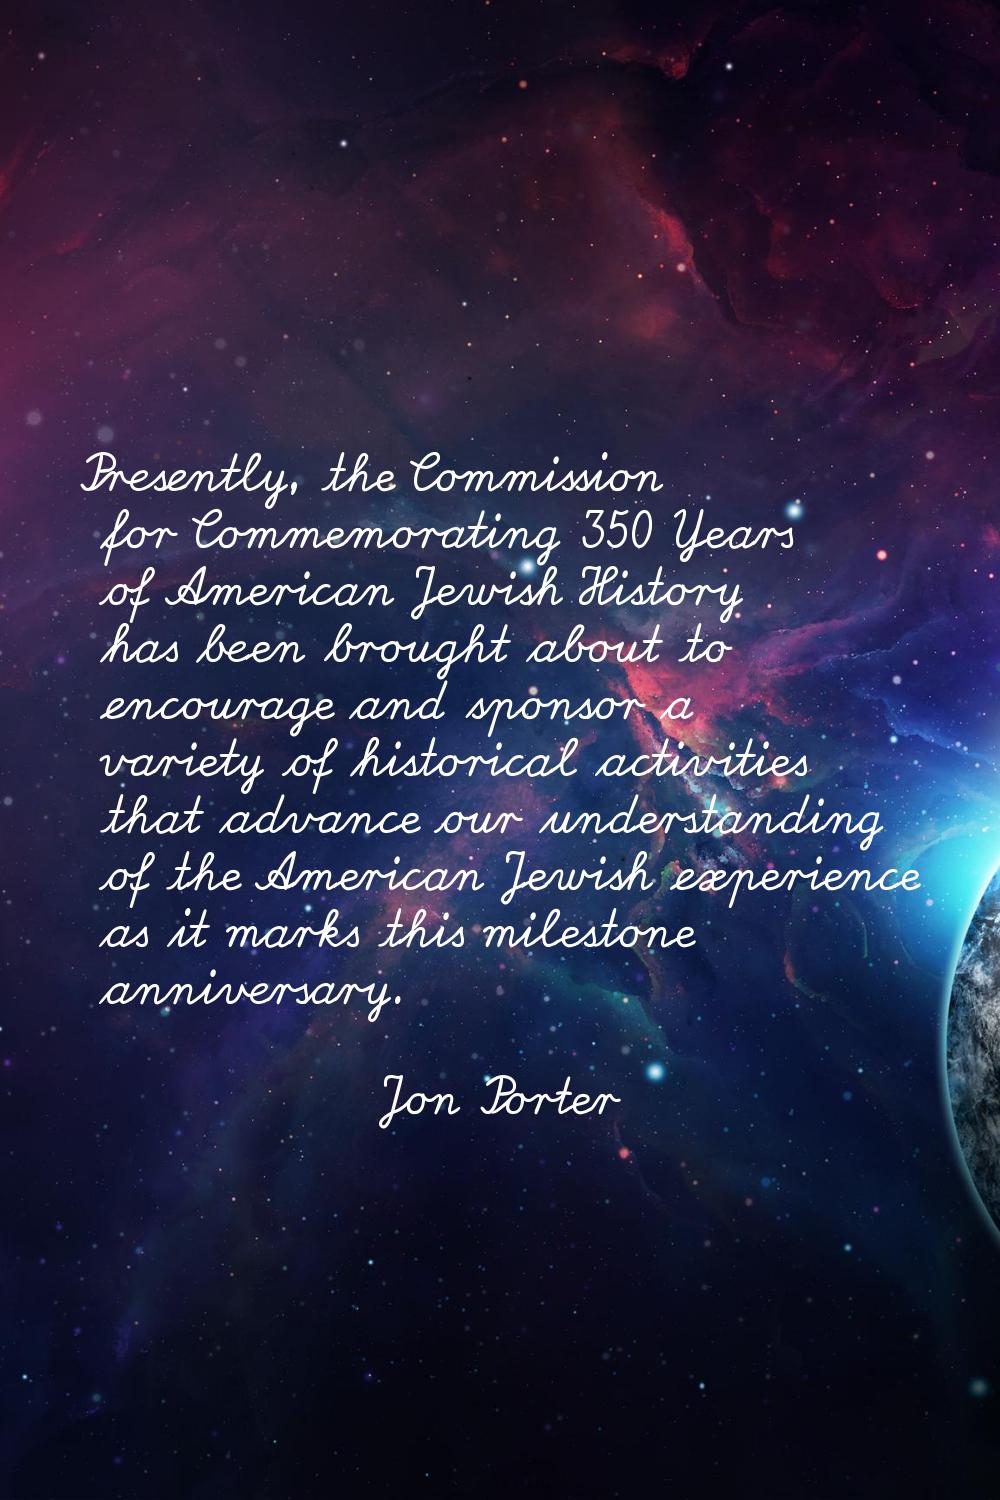 Presently, the Commission for Commemorating 350 Years of American Jewish History has been brought a